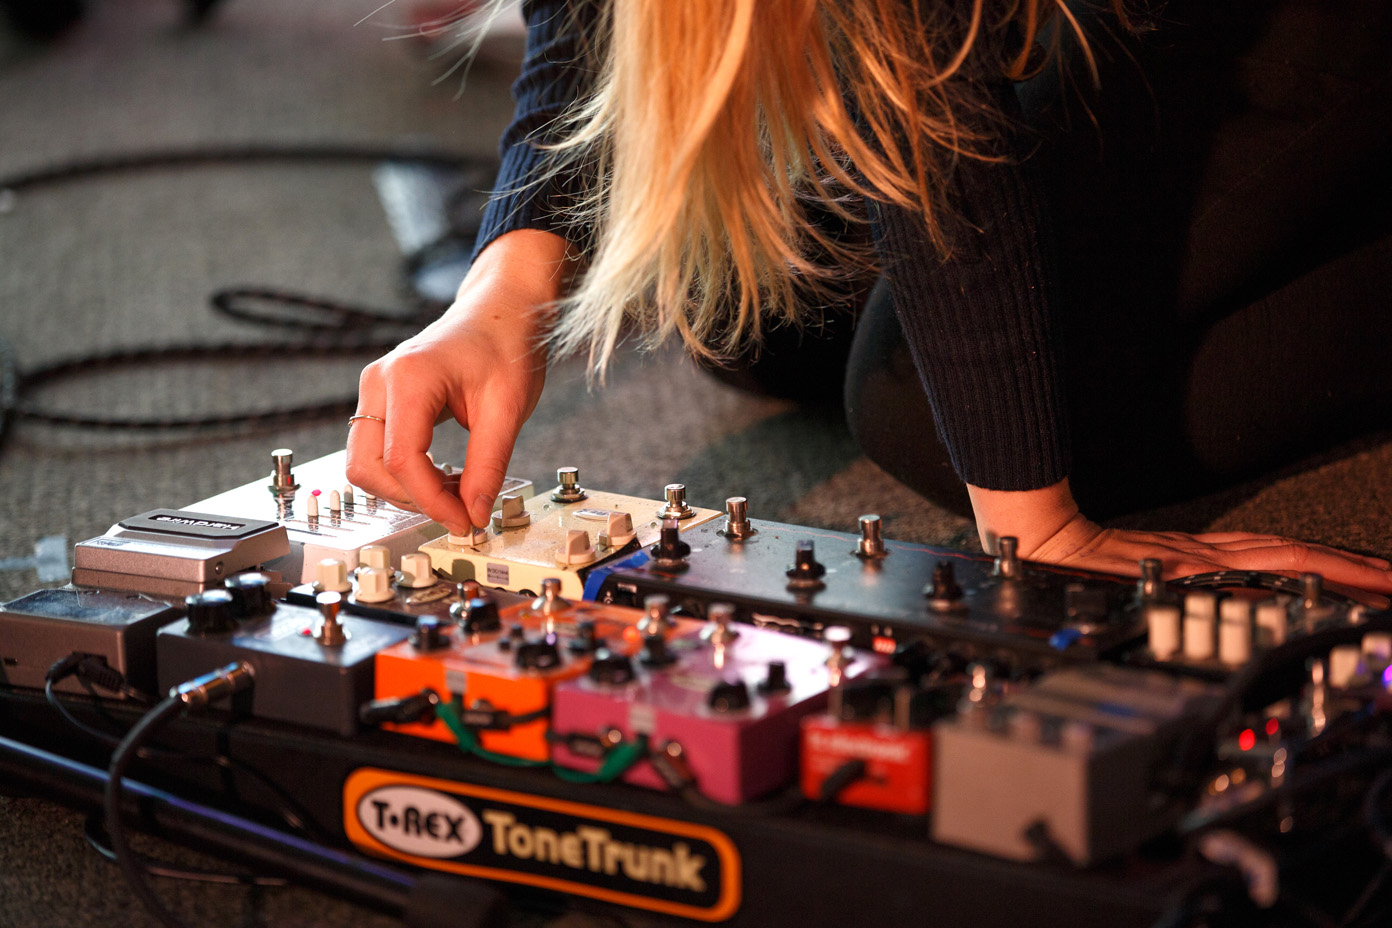 Signe setting up her pedals during soundcheck